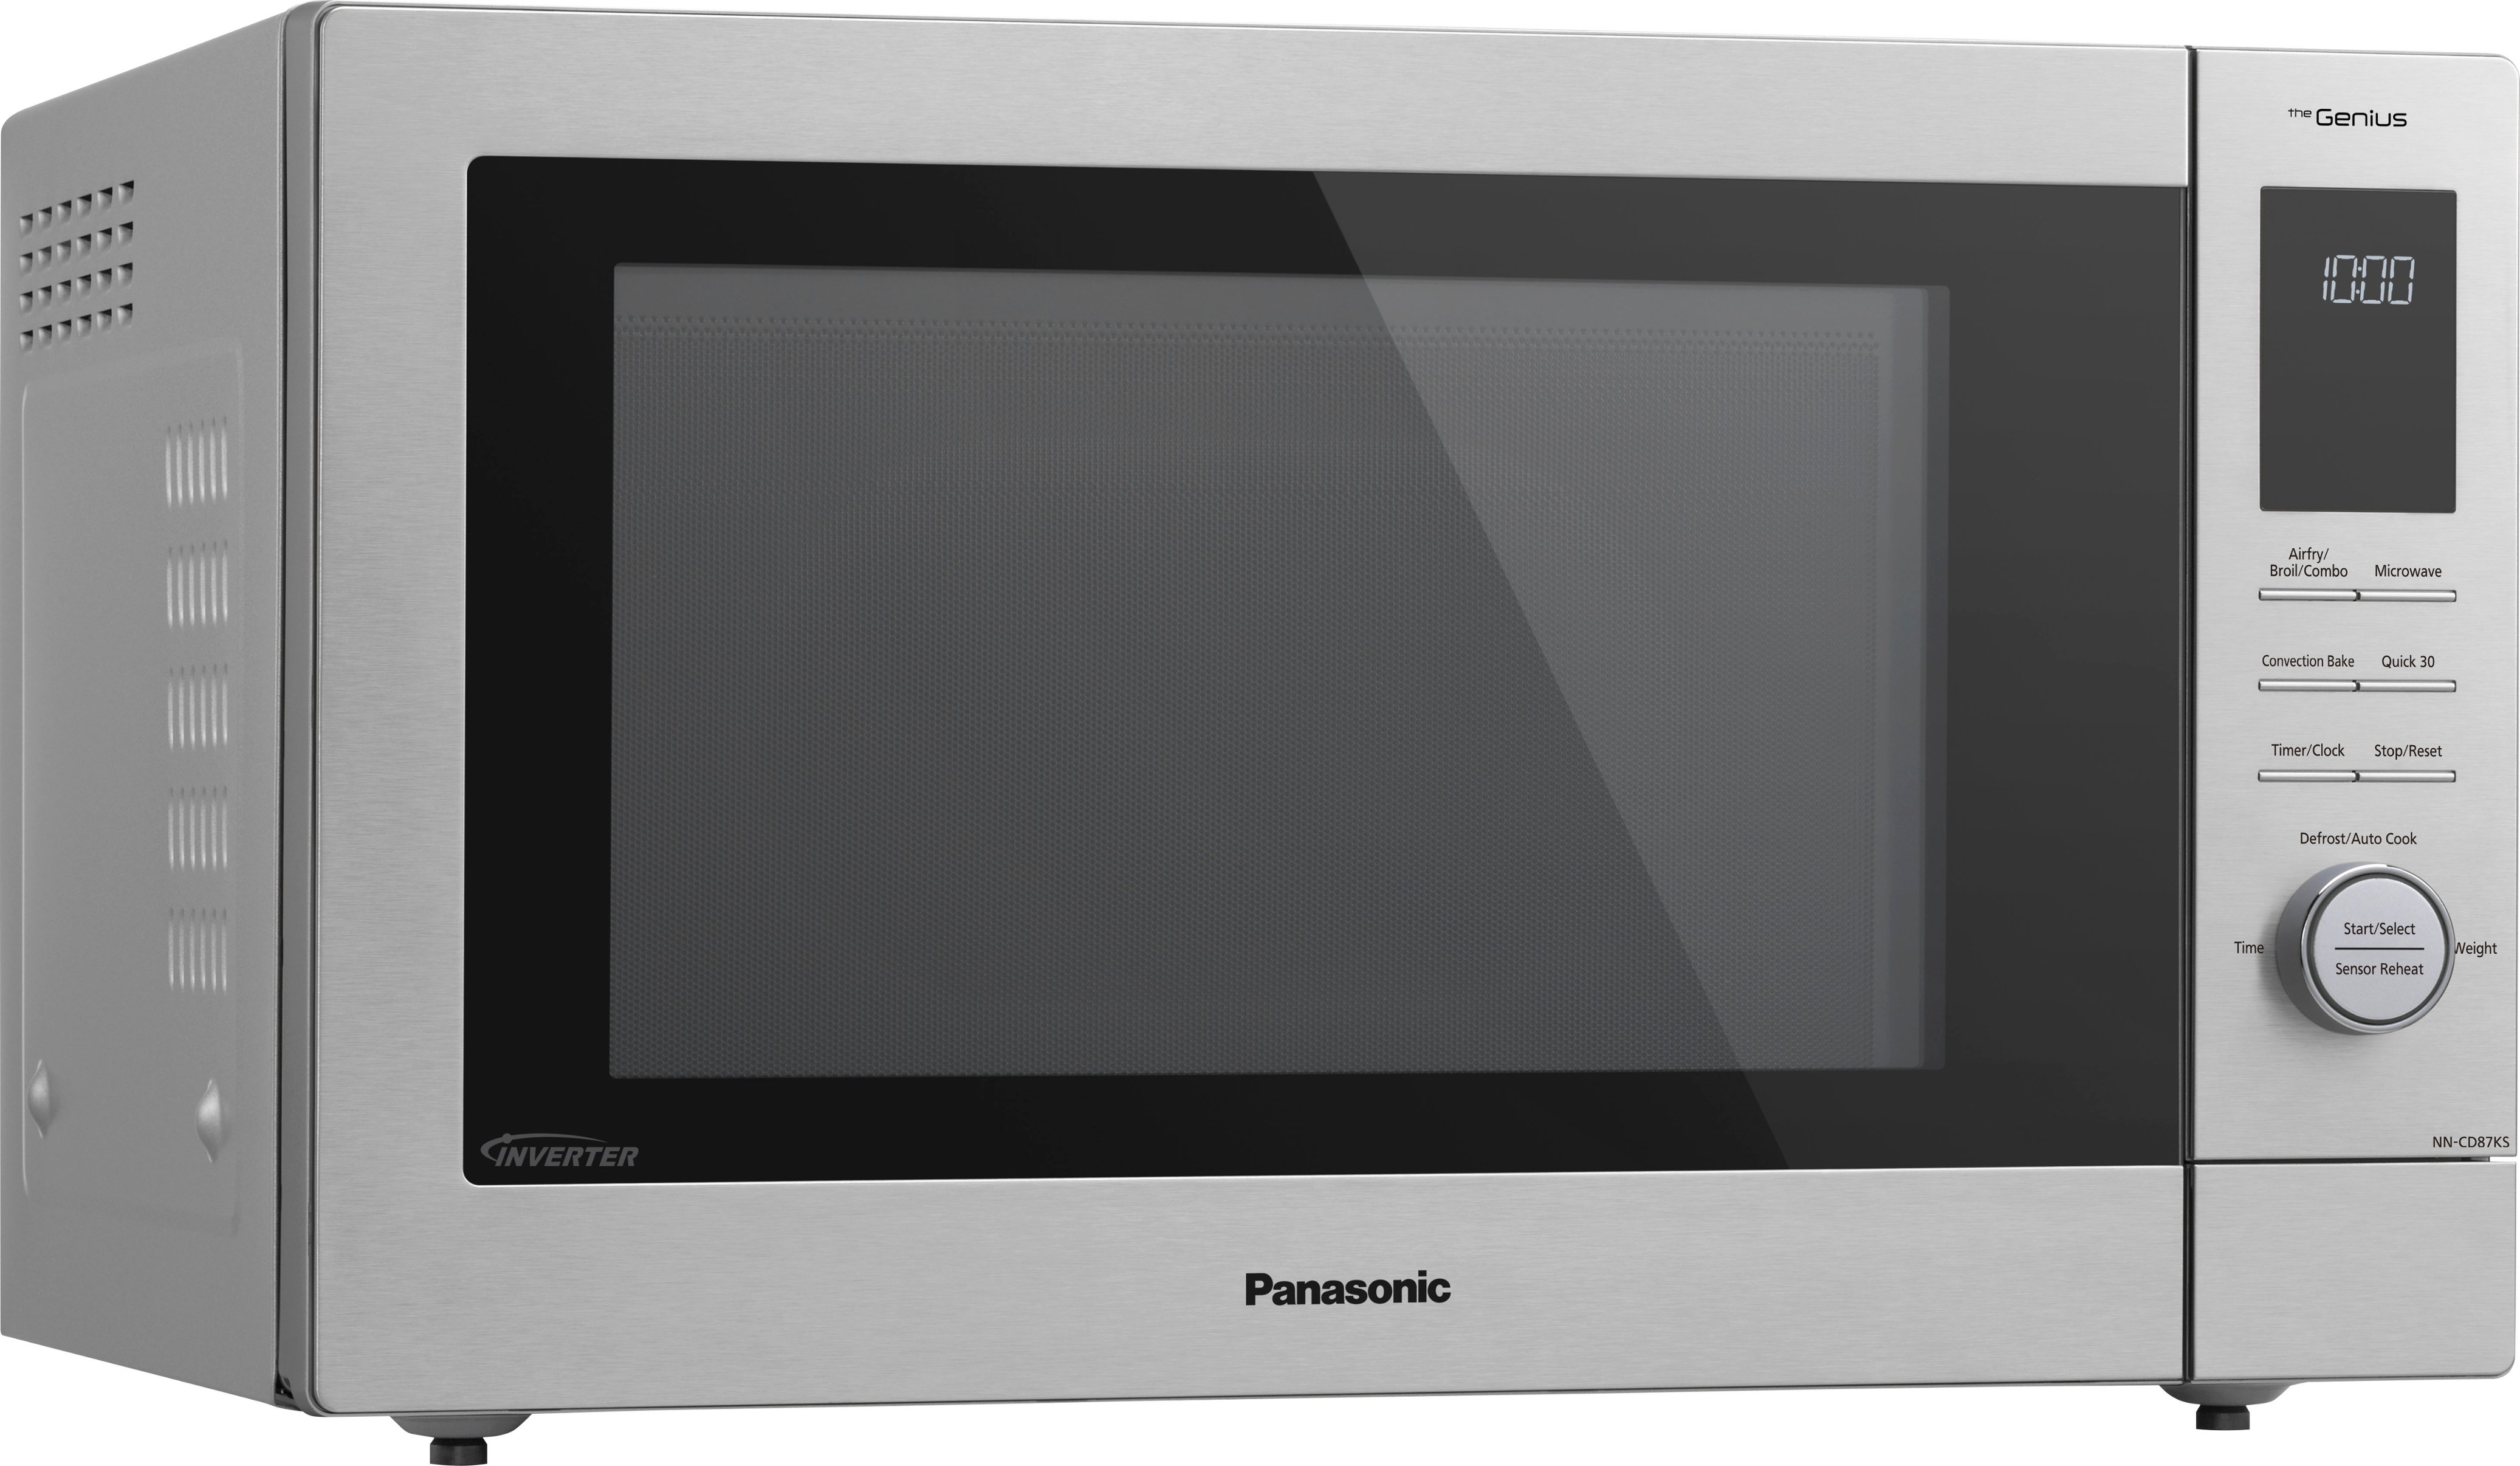 Panasonic NN-SD372 Review - Pros, Cons and Verdict 